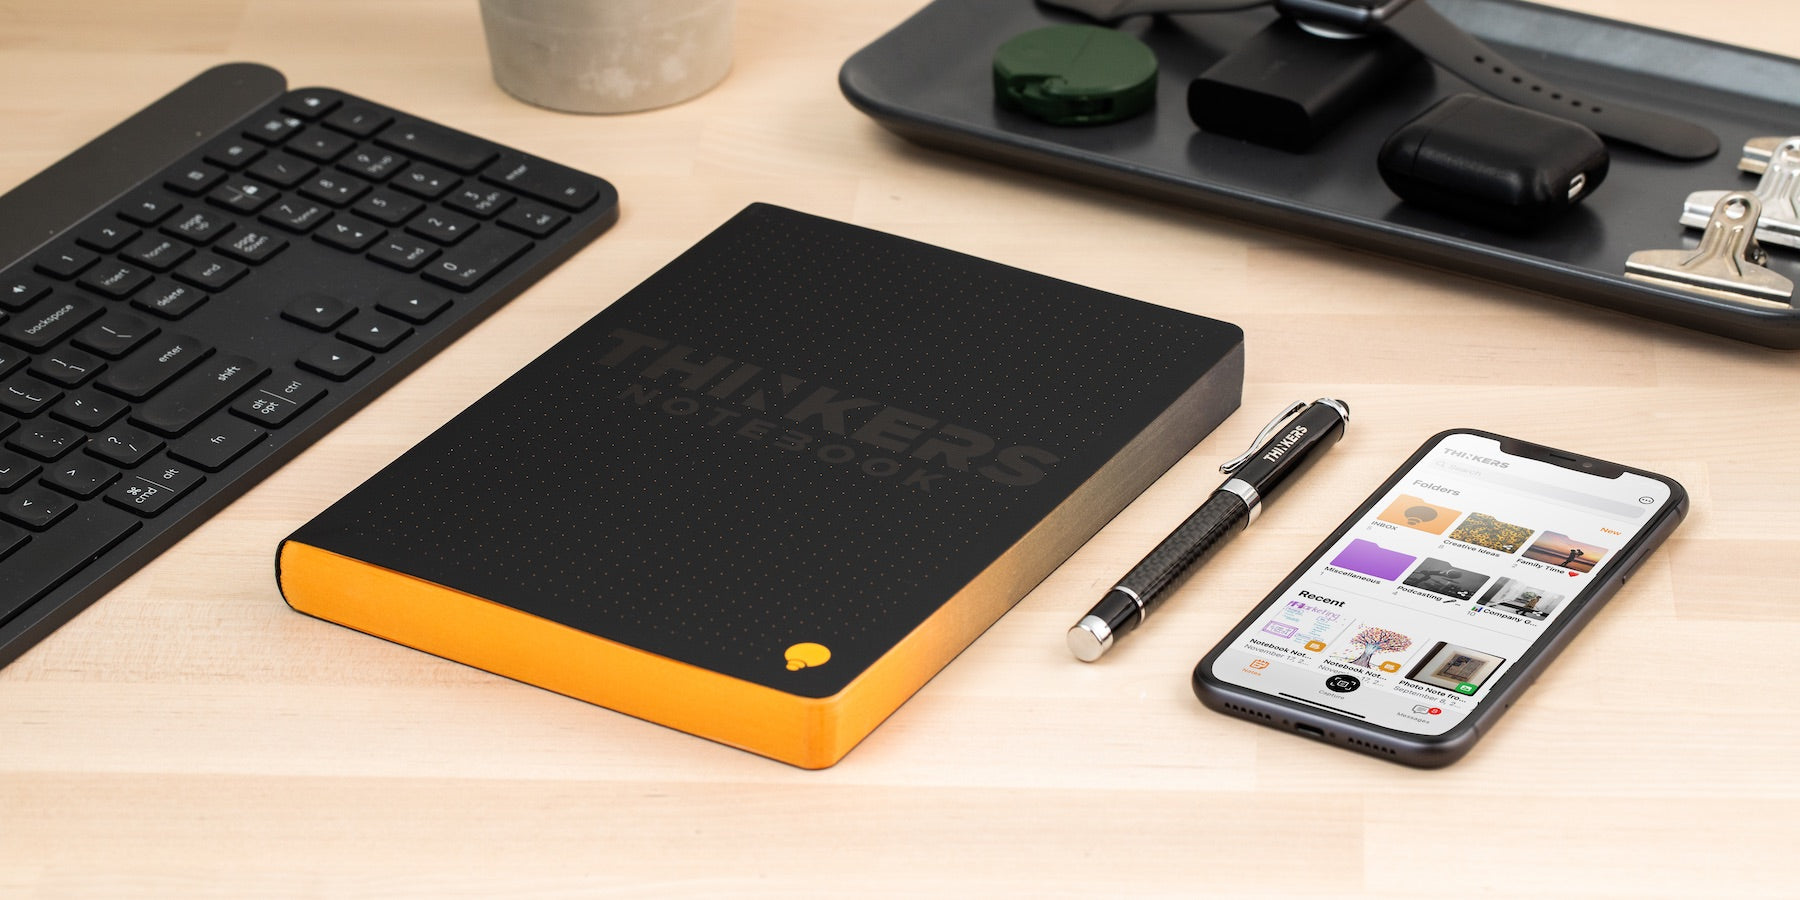 The THINKERS Notebook is a smart notebook solution for the office, home, or on the road. Combining a premium journal with an intuitive app, the THINKERS Notebook makes it easy to capture and collaborate on your best ideas.